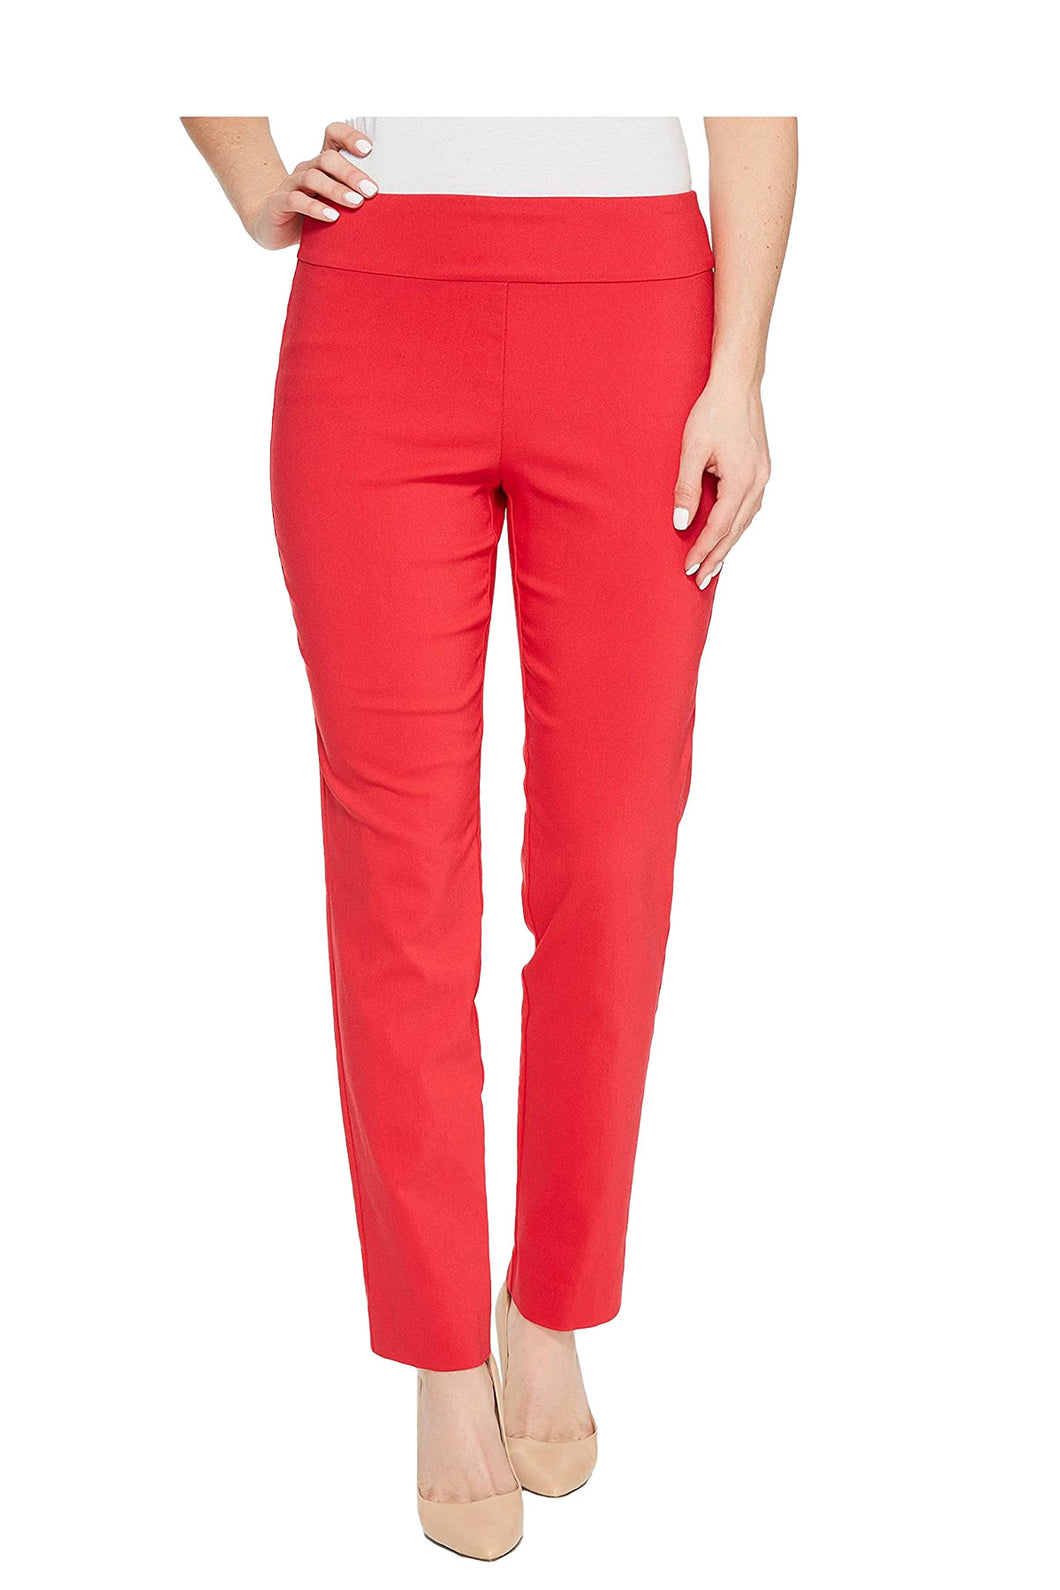 Krazy Larry | Pull on Pant Red